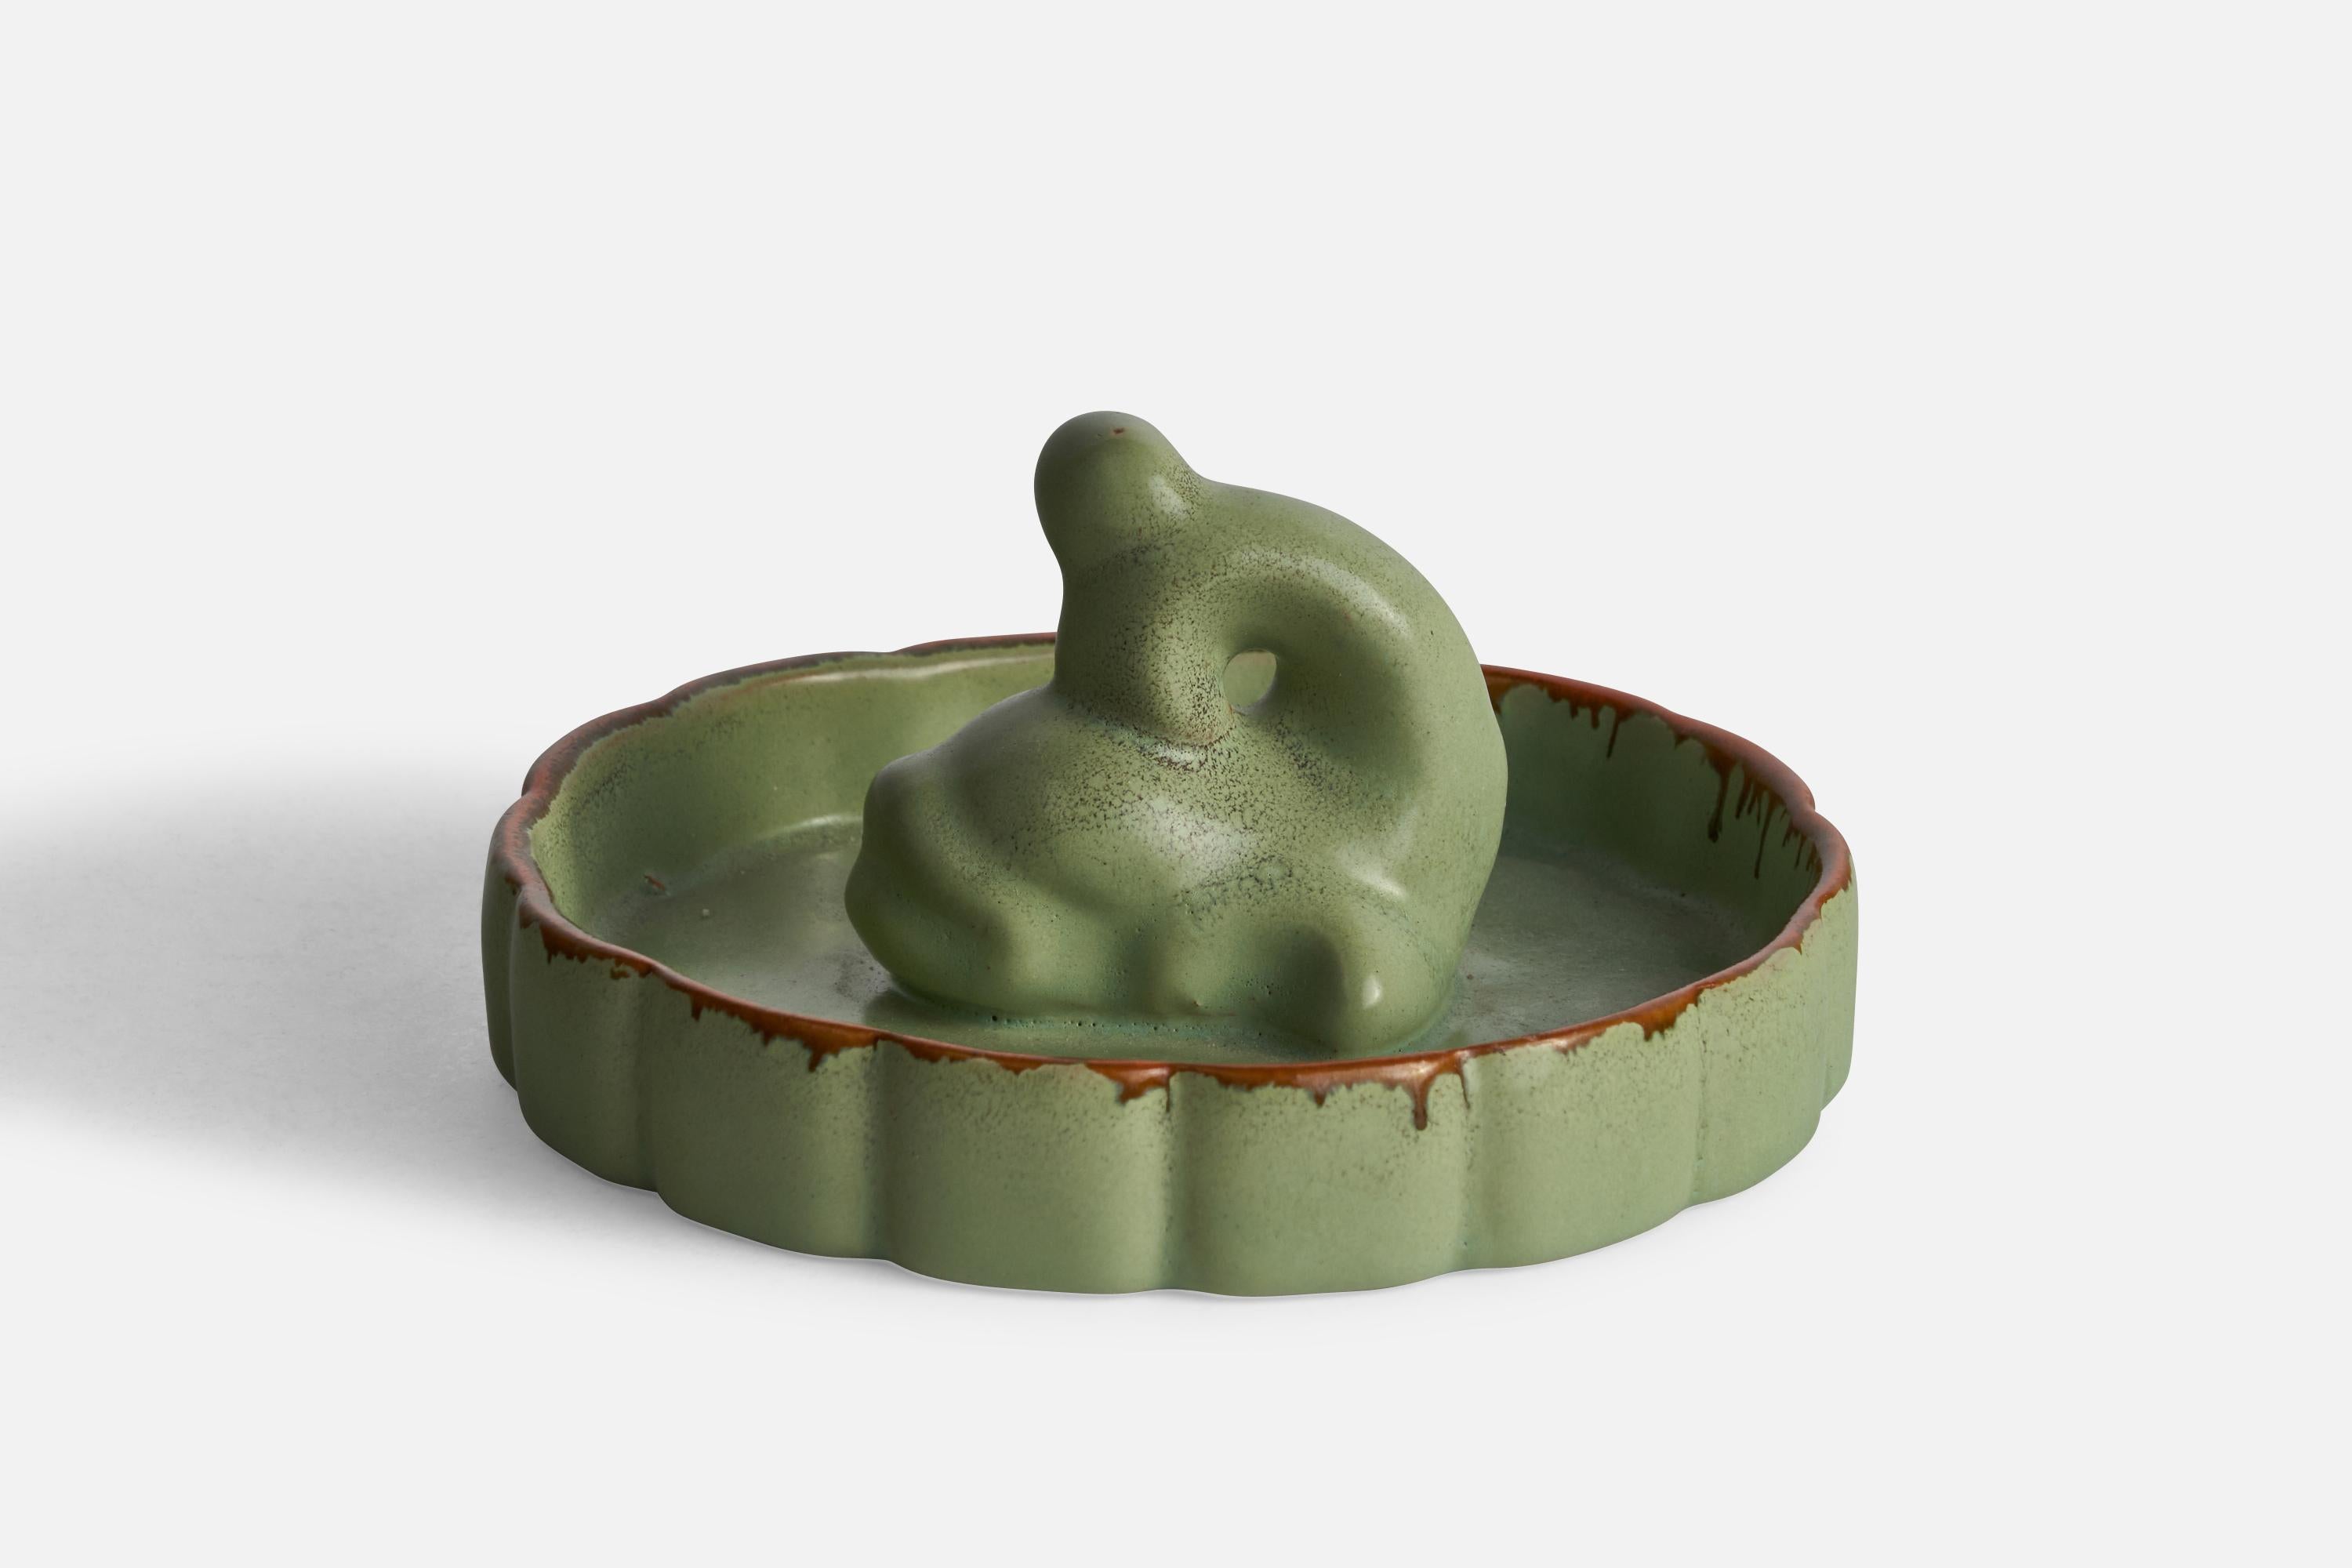 A green-glazed ceramic dish or vide-poche designed by Arthur Percy and produced by Gefle, Sweden, c. 1930s.